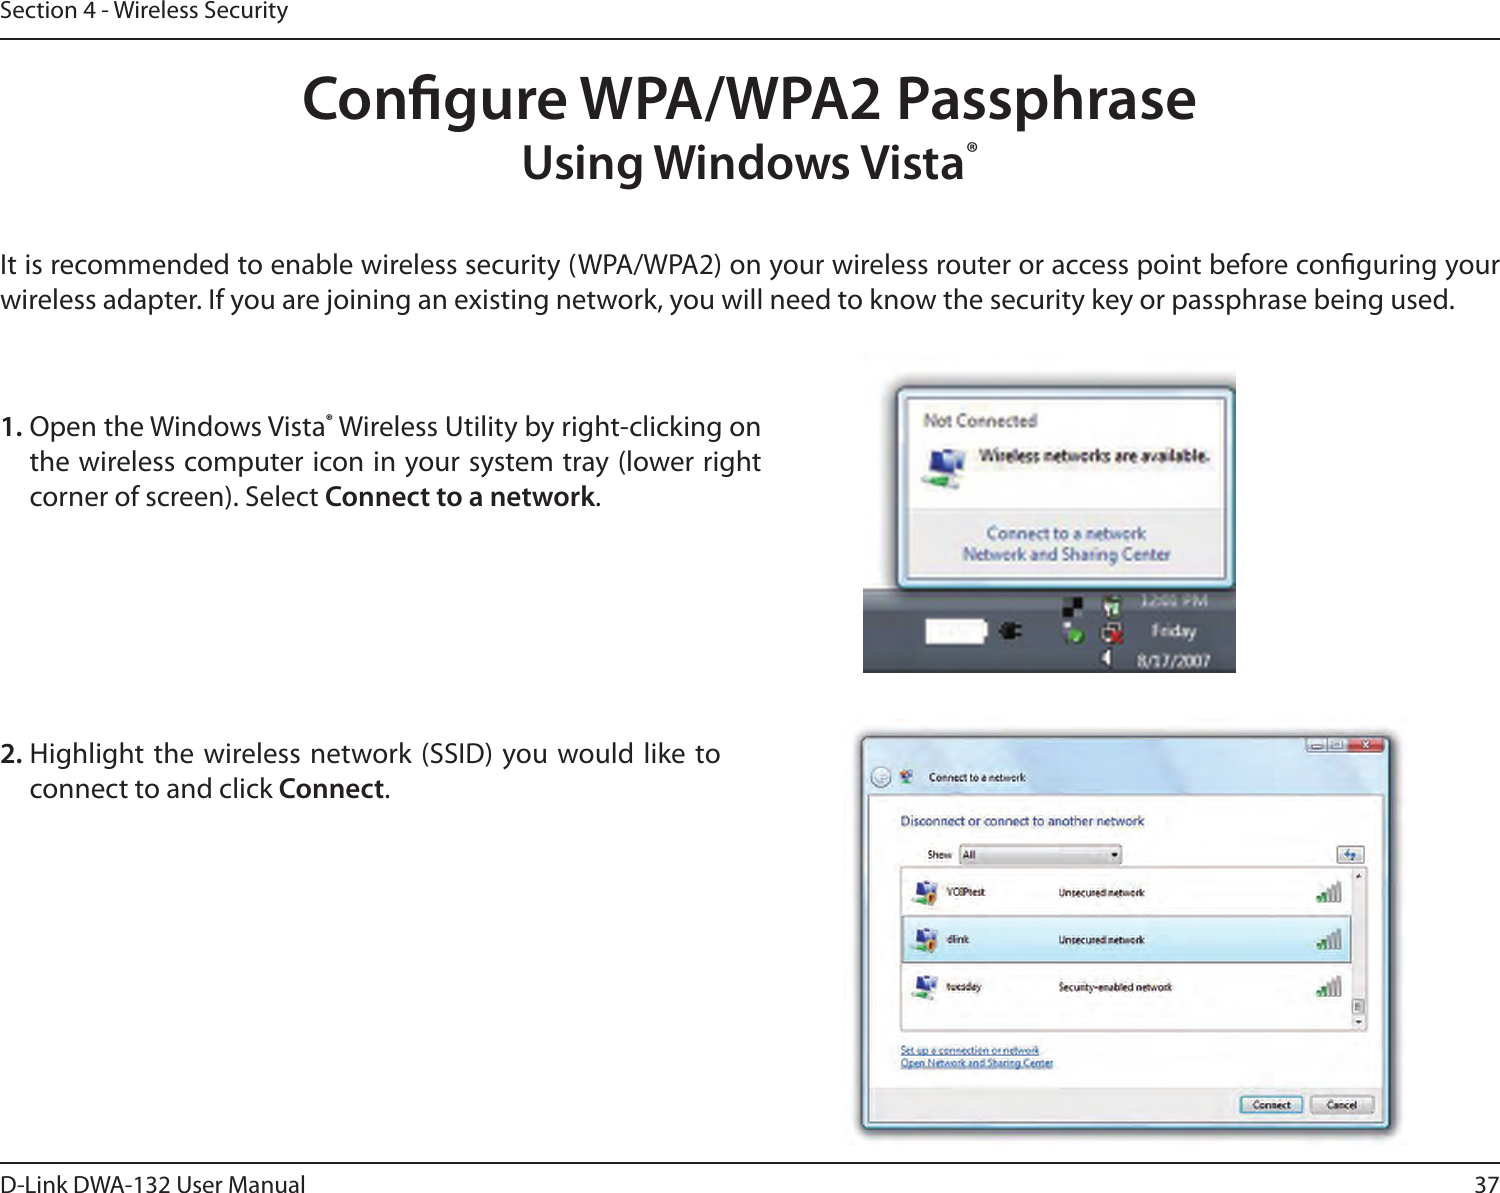 37D-Link DWA-132 User ManualSection 4 - Wireless SecurityCongure WPA/WPA2 PassphraseUsing Windows Vista®It is recommended to enable wireless security (WPA/WPA2) on your wireless router or access point before conguring your wireless adapter. If you are joining an existing network, you will need to know the security key or passphrase being used.2. Highlight the  wireless network (SSID) you would like to connect to and click Connect.1. Open the Windows Vista® Wireless Utility by right-clicking on the wireless computer icon in your system tray (lower right corner of screen). Select Connect to a network. 